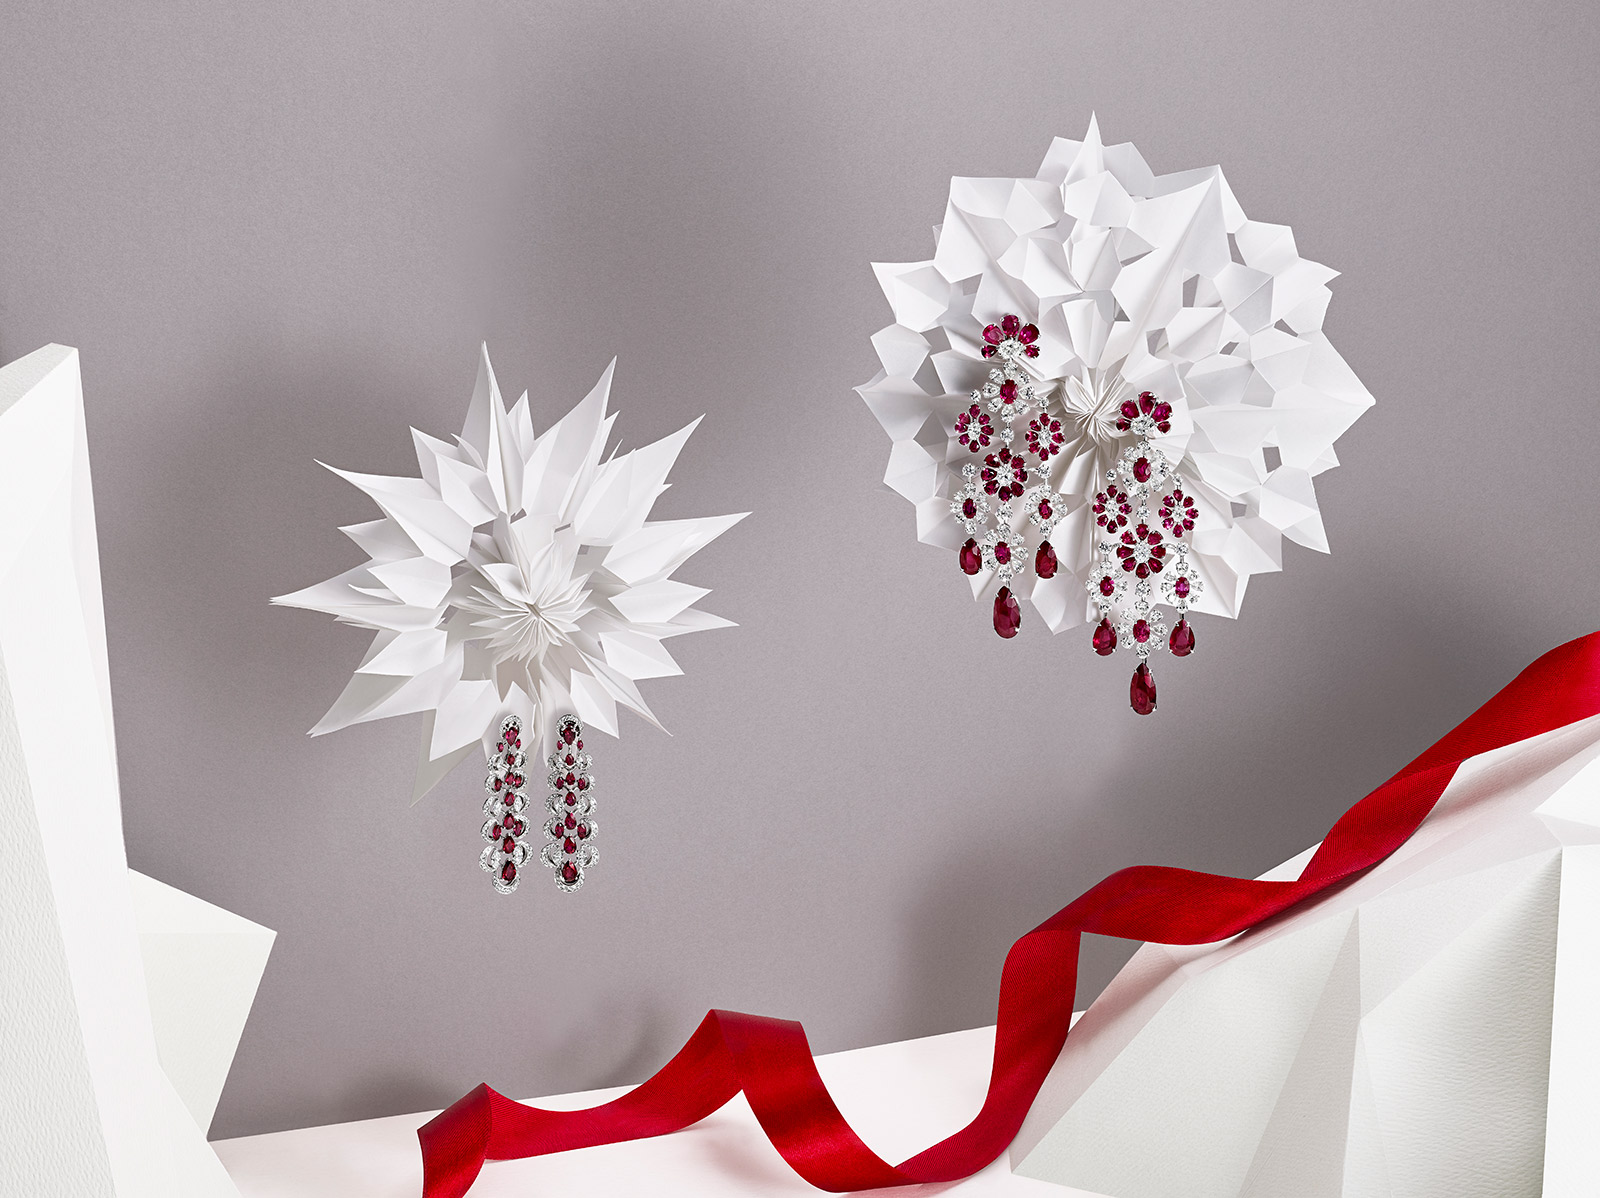 Left to right: Chopard Haute Joaillerie collection earrings with 6.75ct rubies and diamonds in white gold, and David Morris earrings with diamonds and rubies in white gold